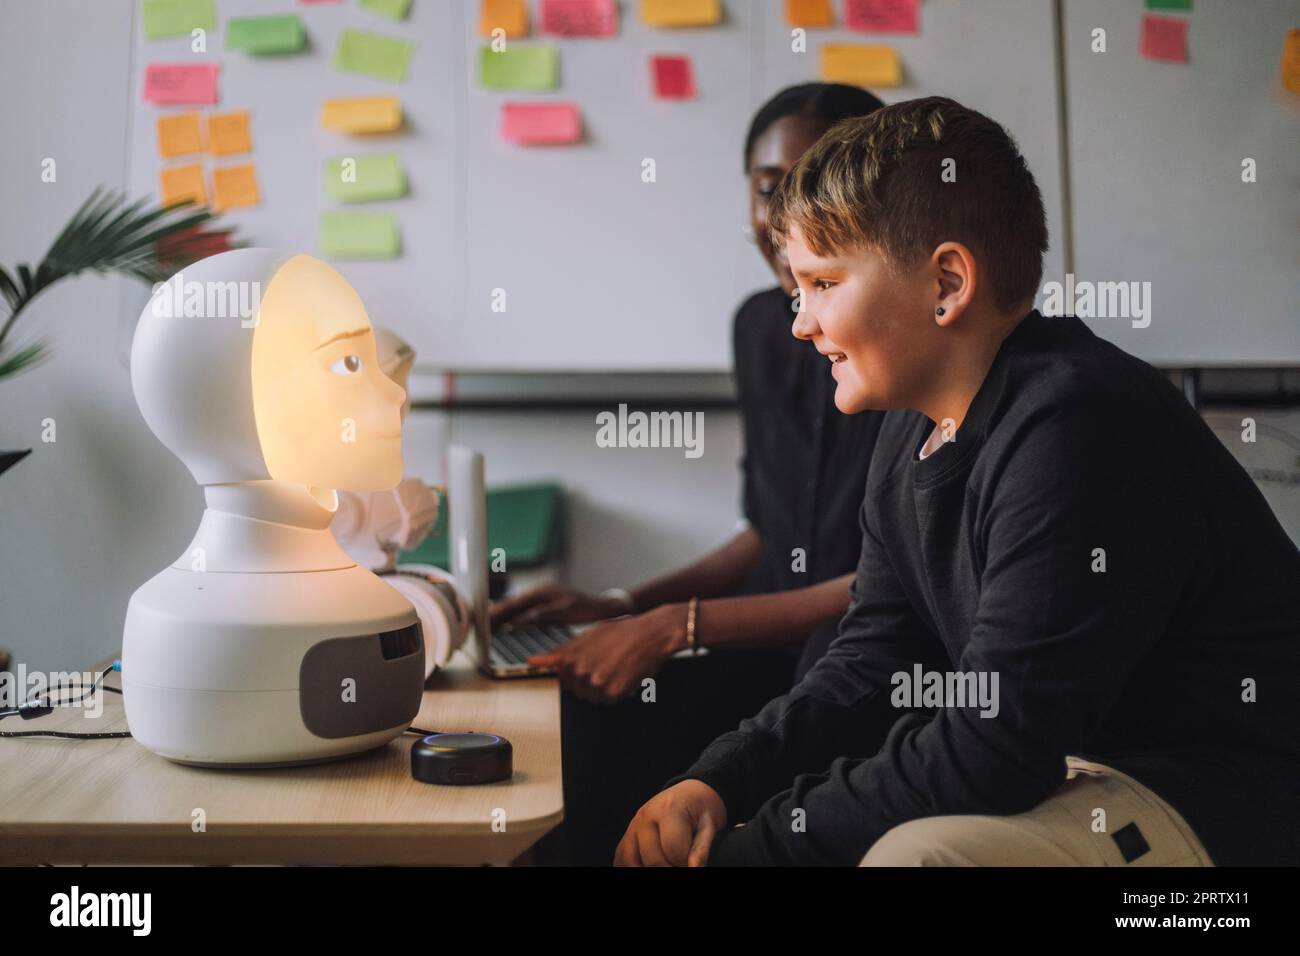 Smiling boy communicating with illuminated AI robot in innovation lab Stock Photo